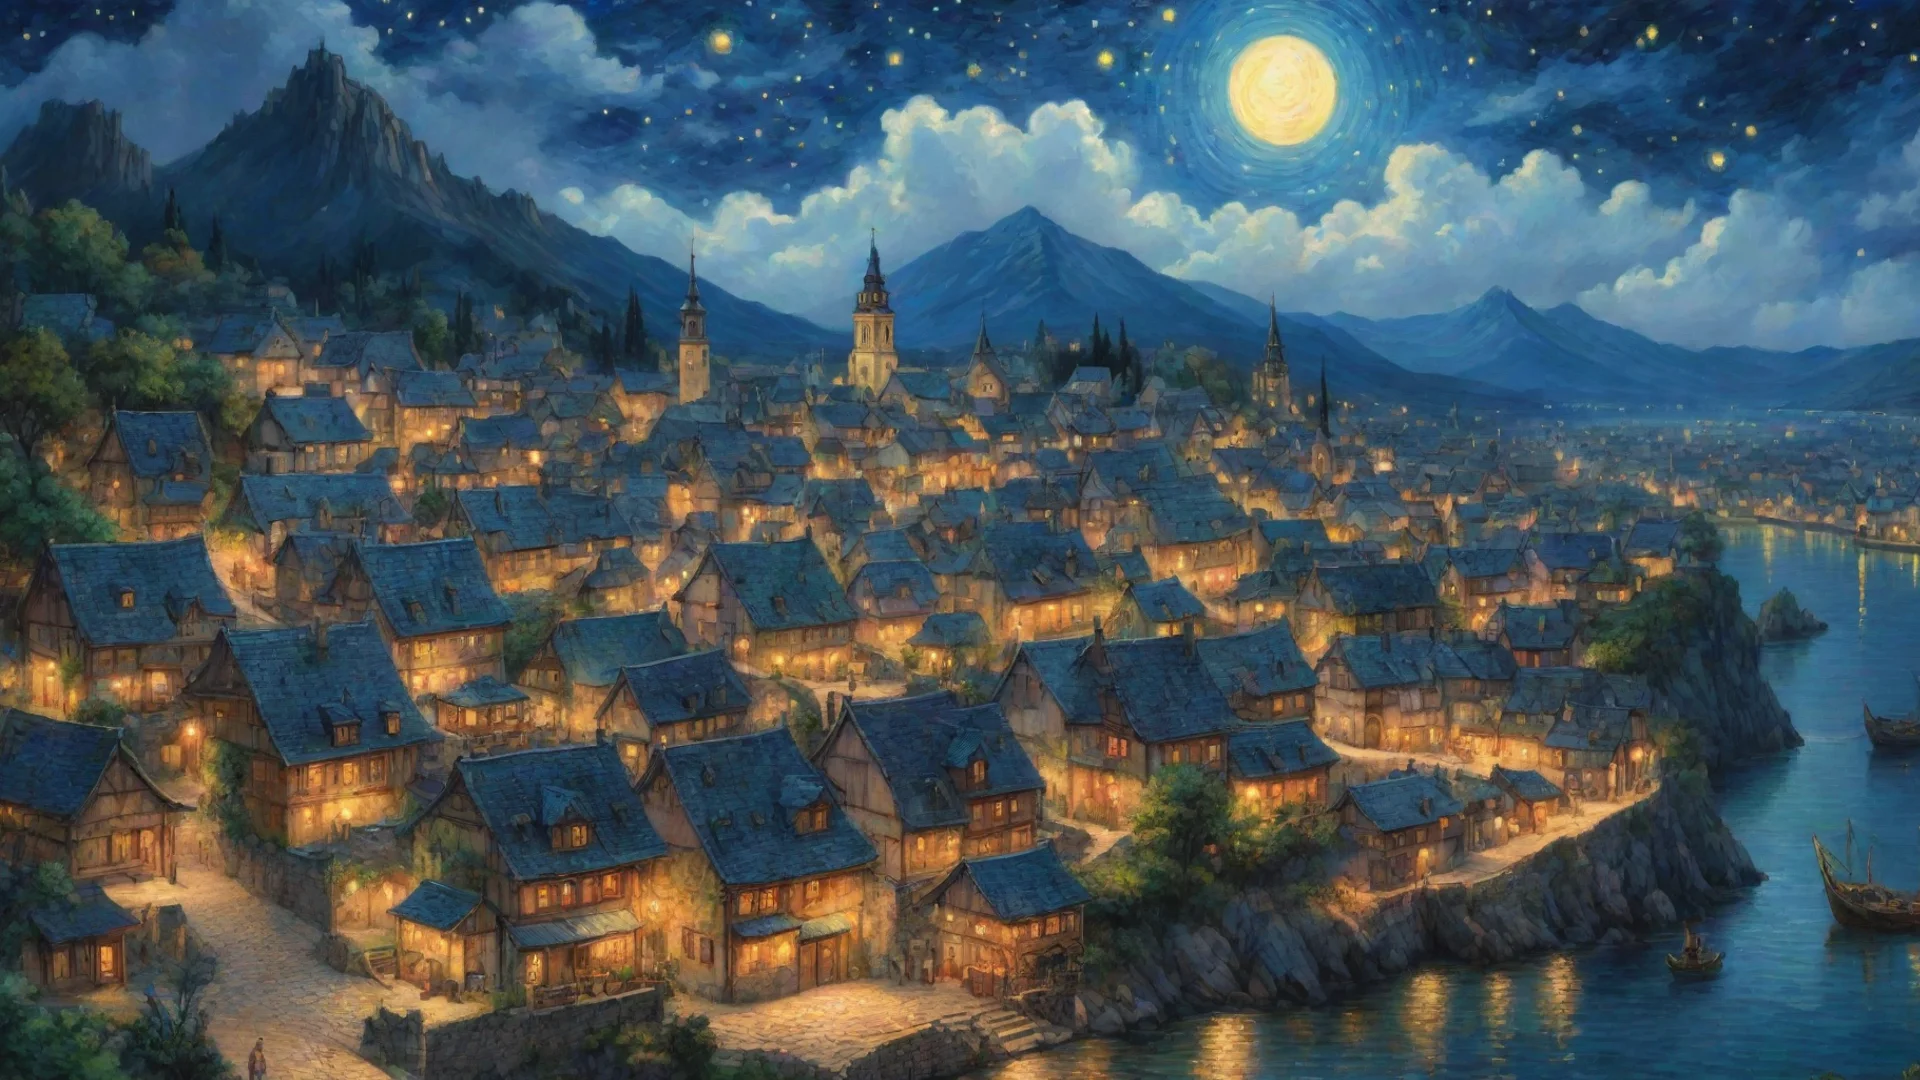 aiartstation art heavenly epic town lit up at night sky epic lovely artistic ghibli van gogh happyness bliss peace  detailed asthetic hd wow confident engaging wow 3 wide